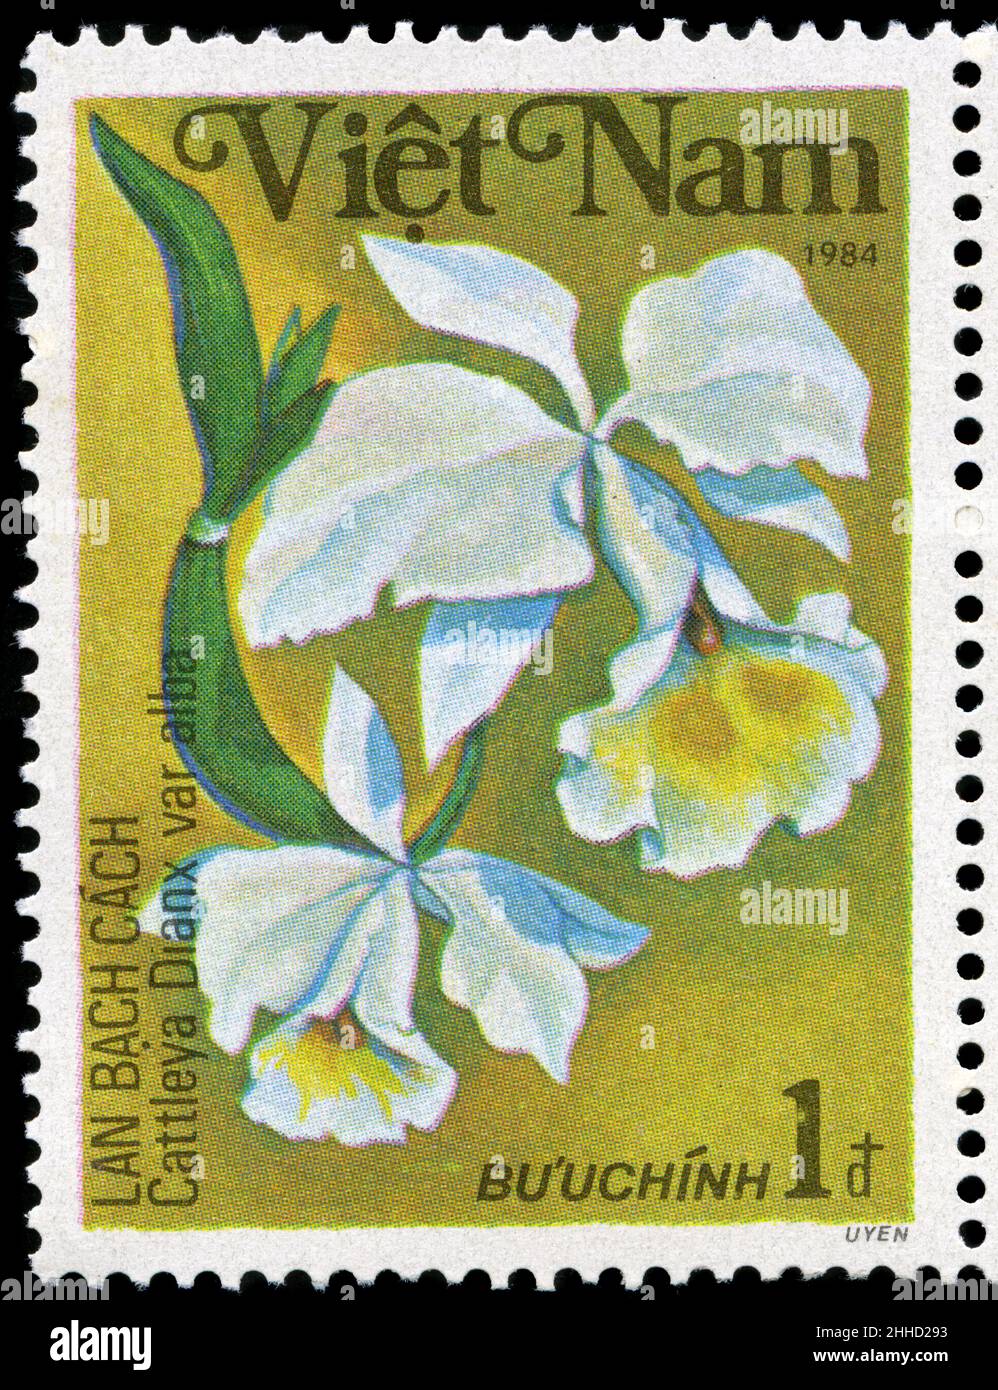 Postage stamp from Vietnam in the Orchids series issued in 1984 Stock Photo